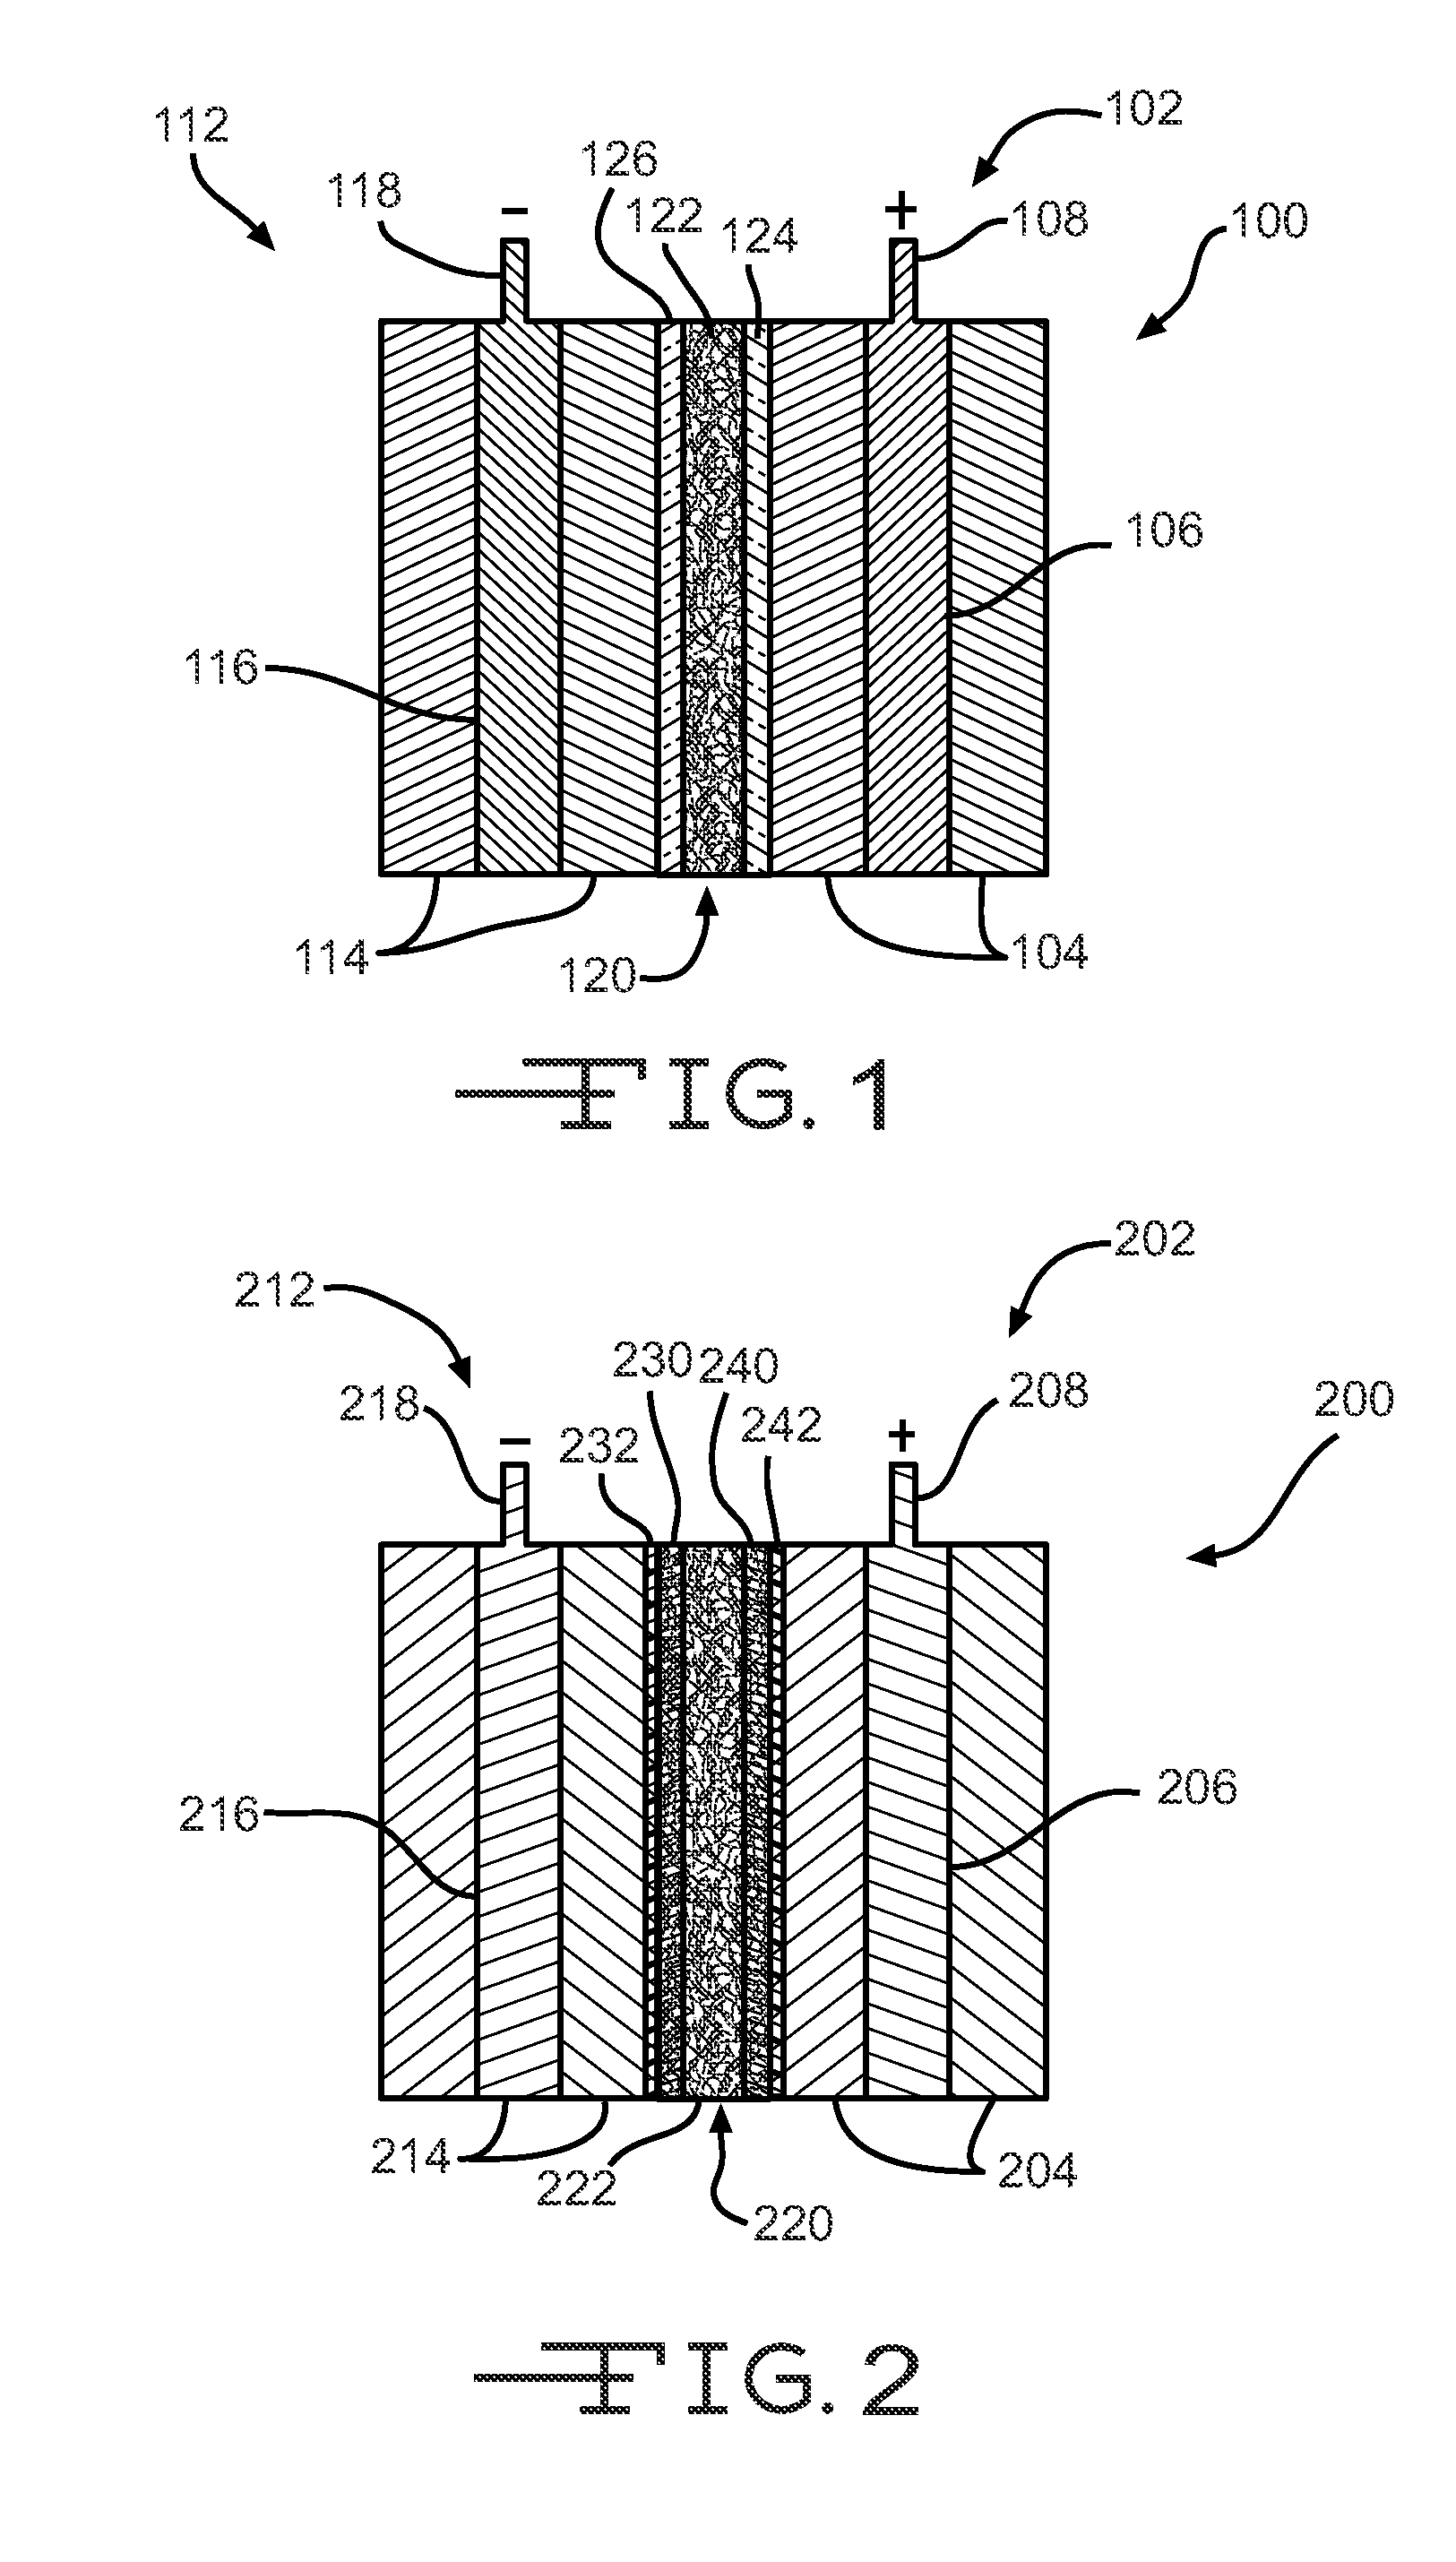 Mat made of glass fibers or polyolefin fibers used as a separator in a lead-acid battery